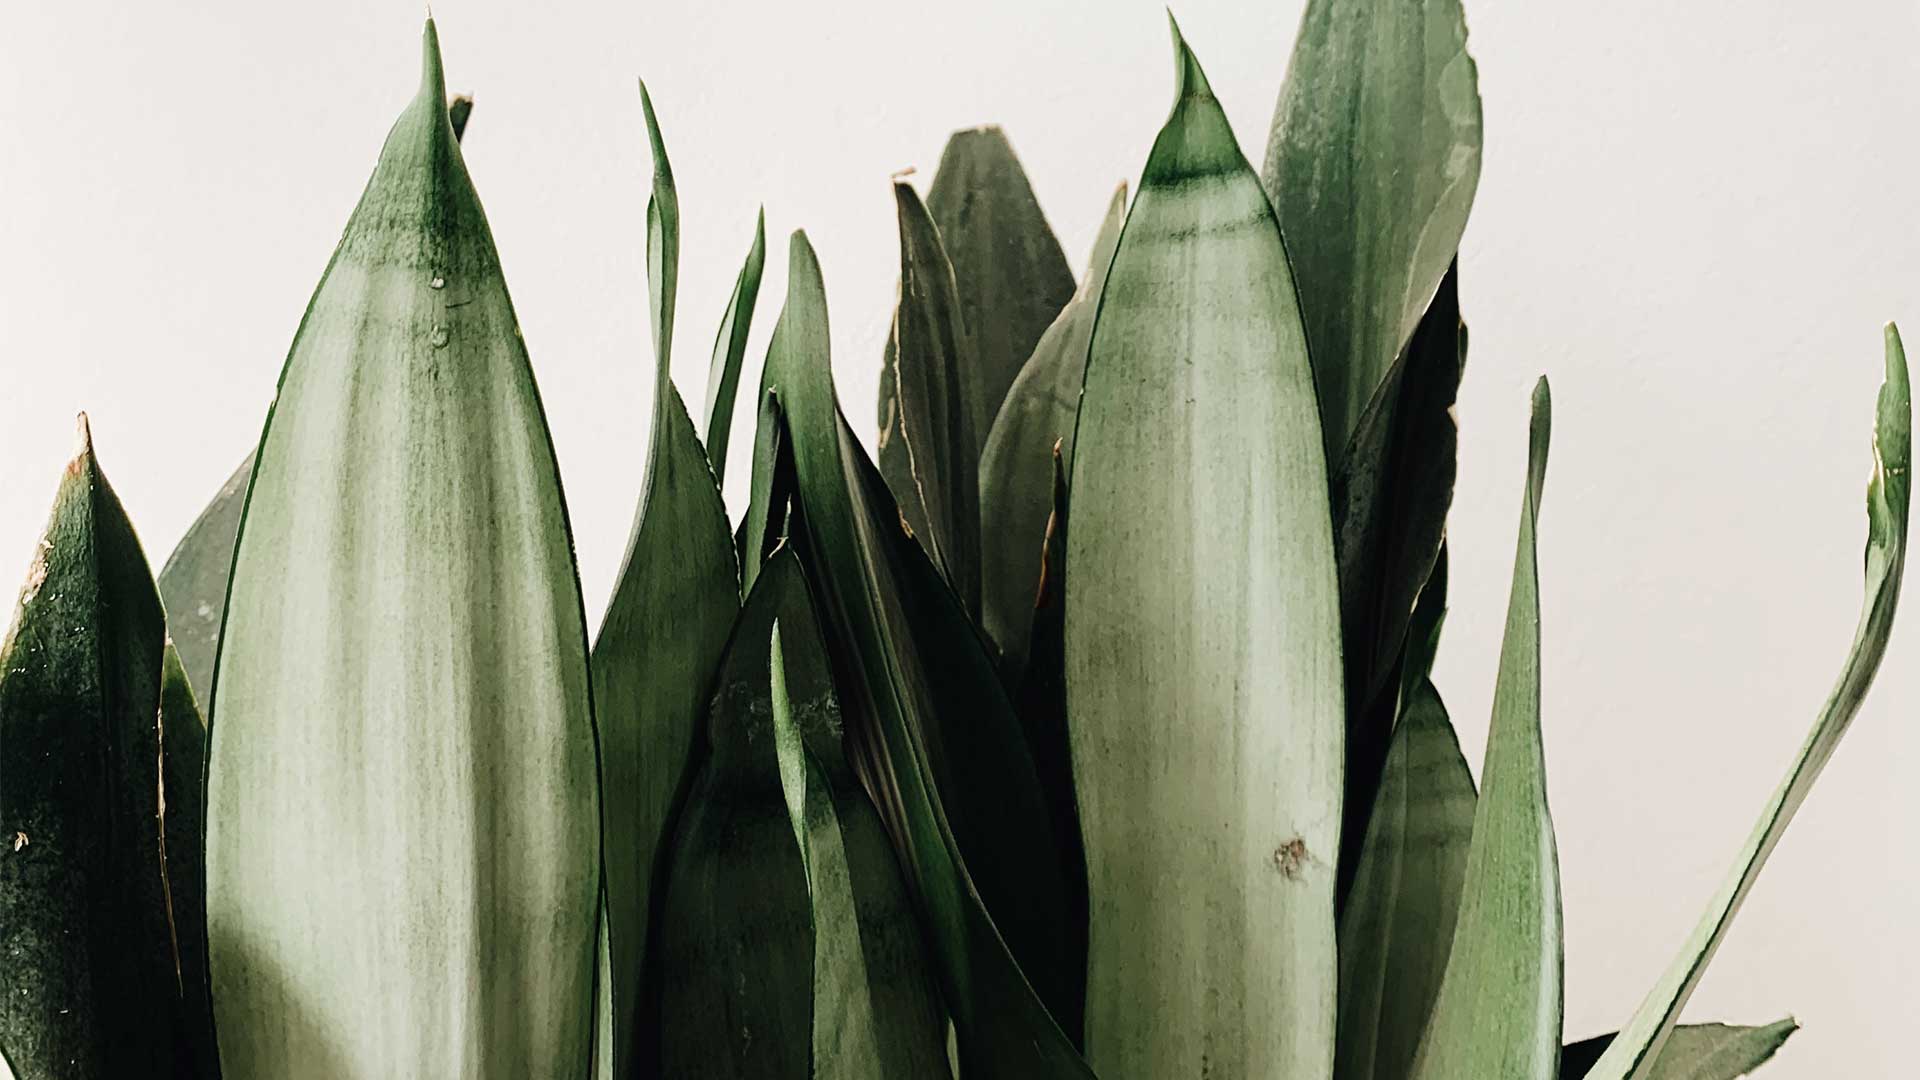 a pale green sansevieria, or snake plant, sits against a plain background